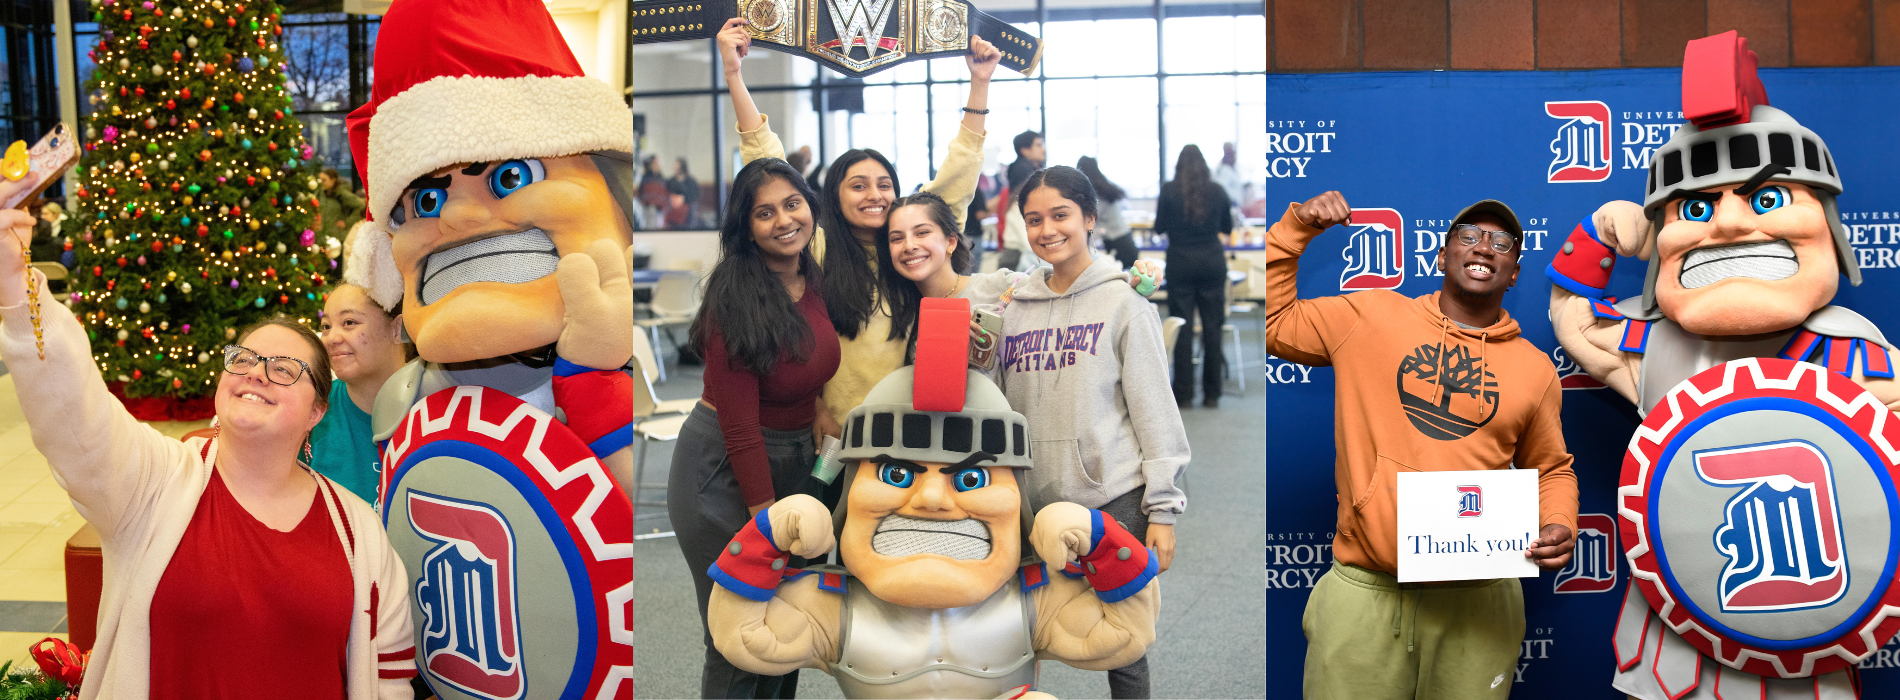 Three photos show Tommy posing with students at events on campus.